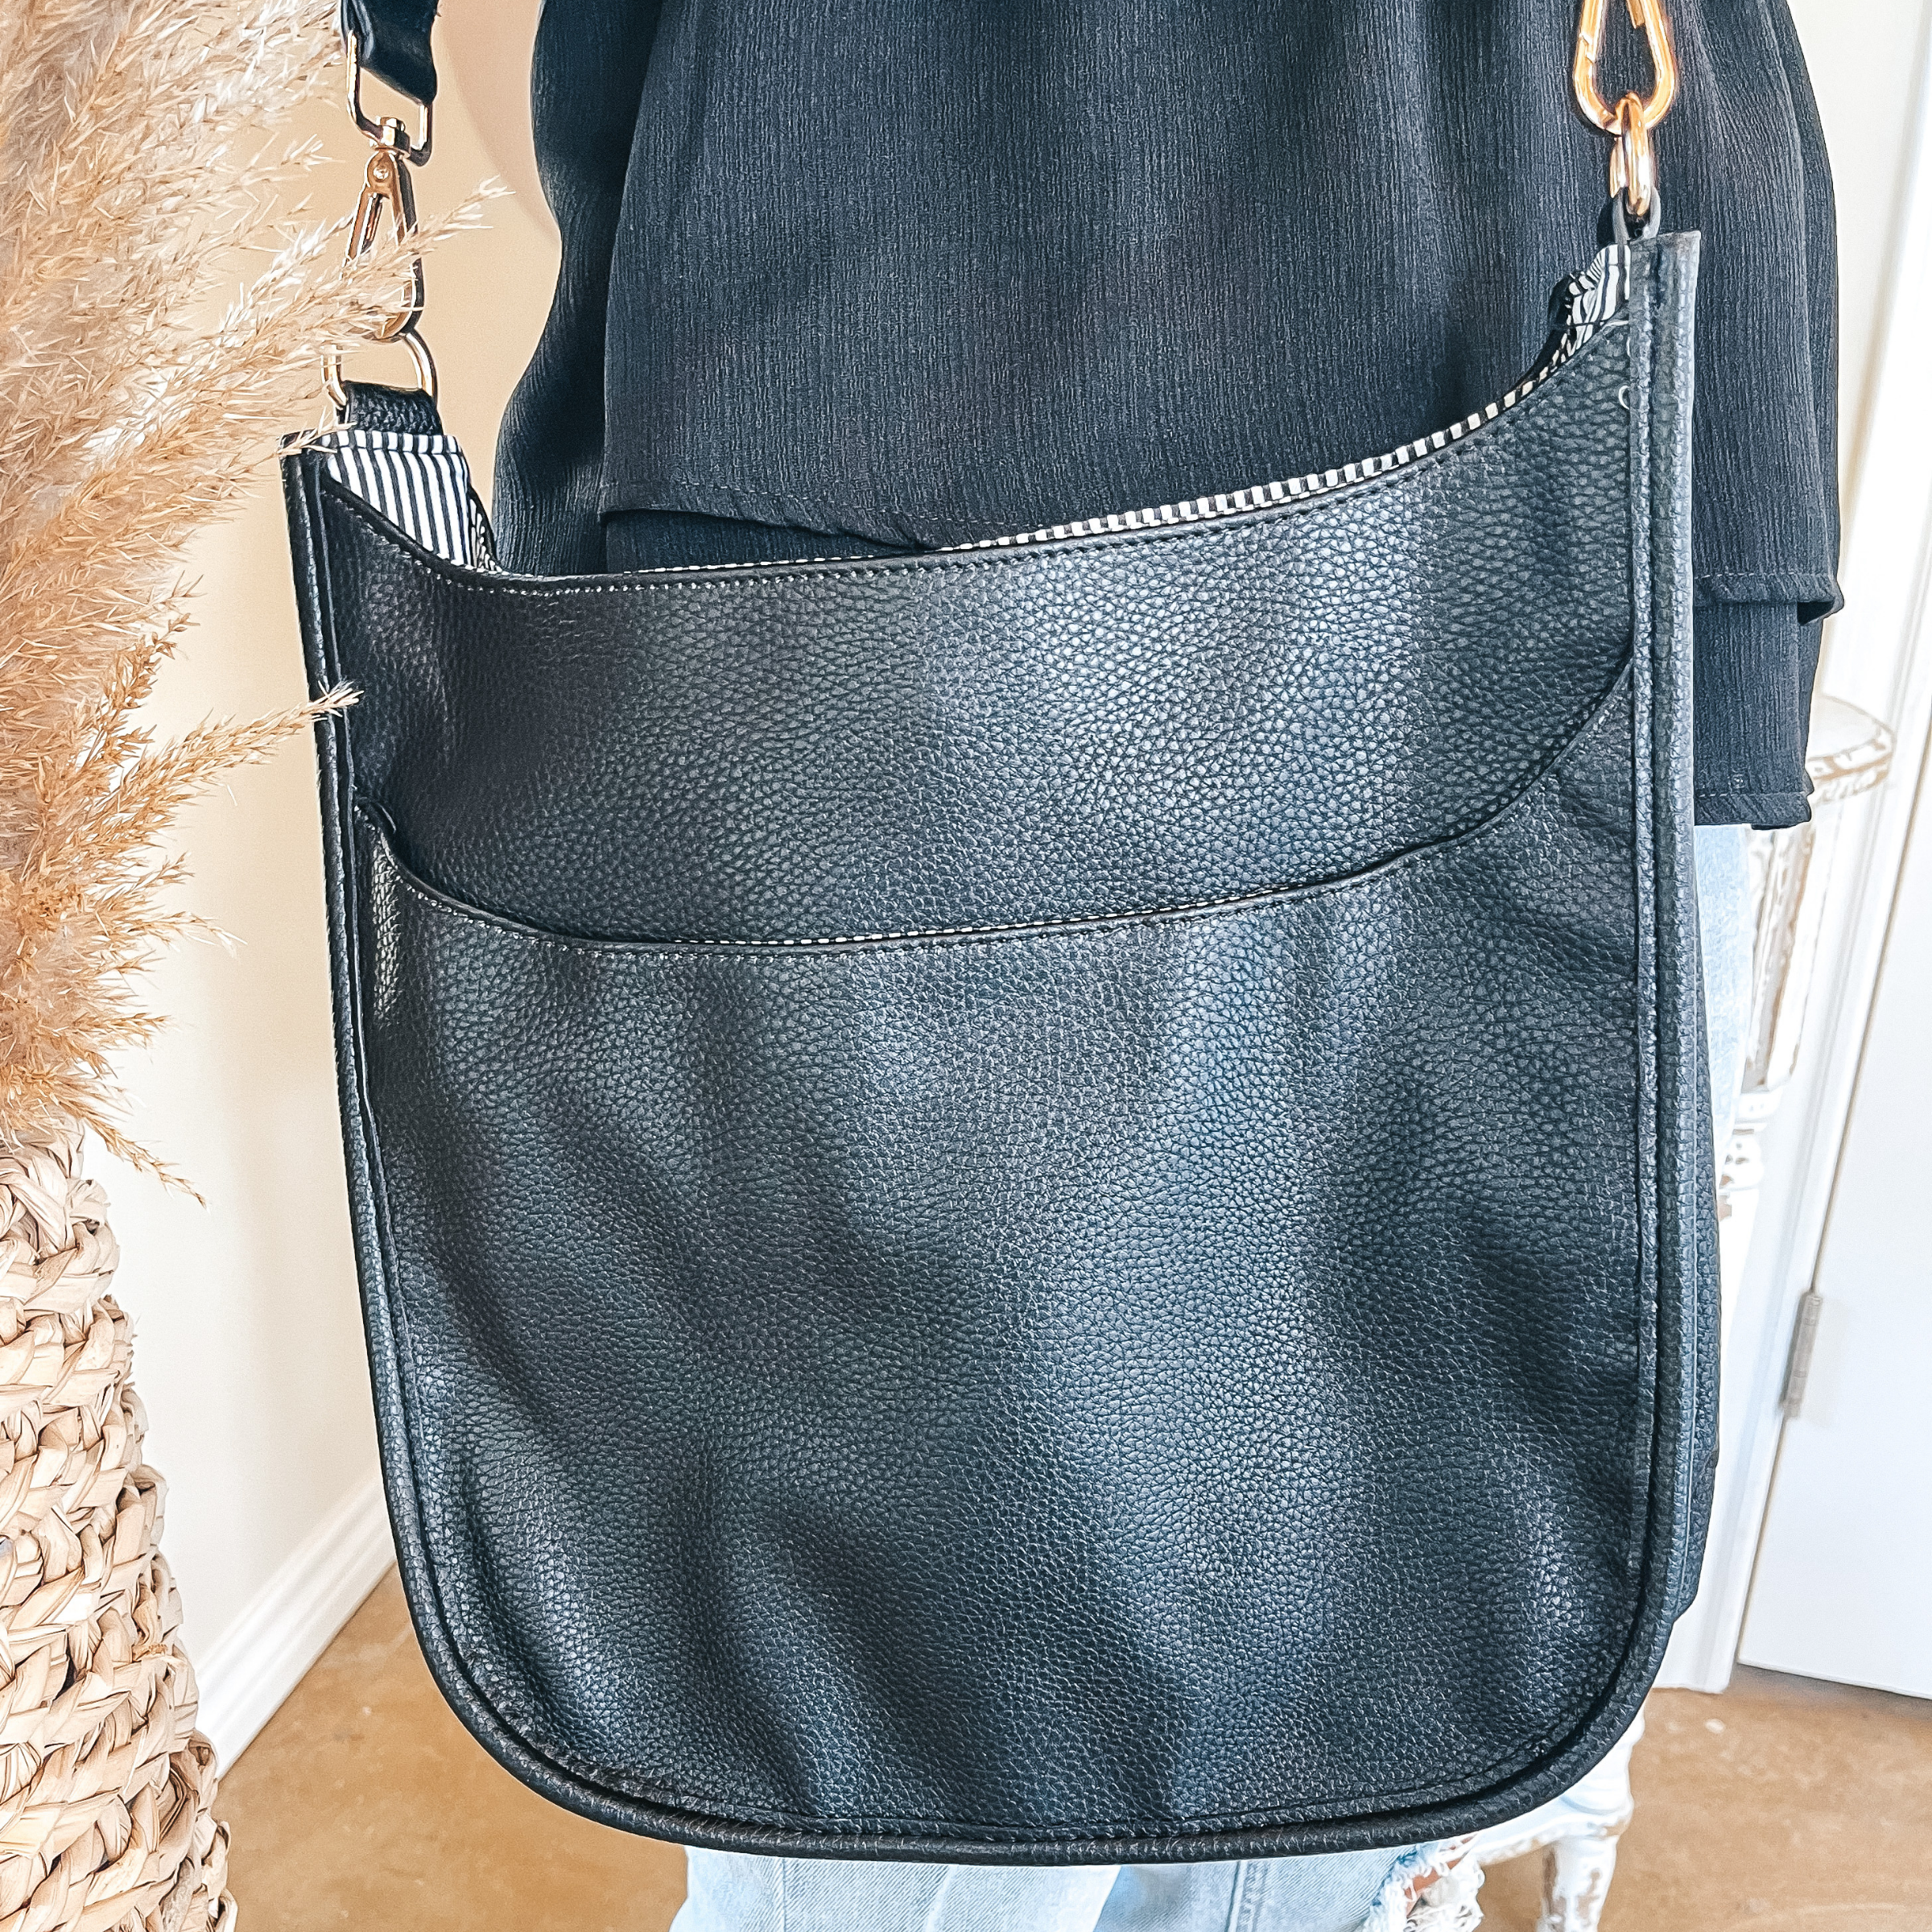 A Stylish Anti-Theft, RFID Secure, Crossbody Bag For Travel – Between Naps  on the Porch